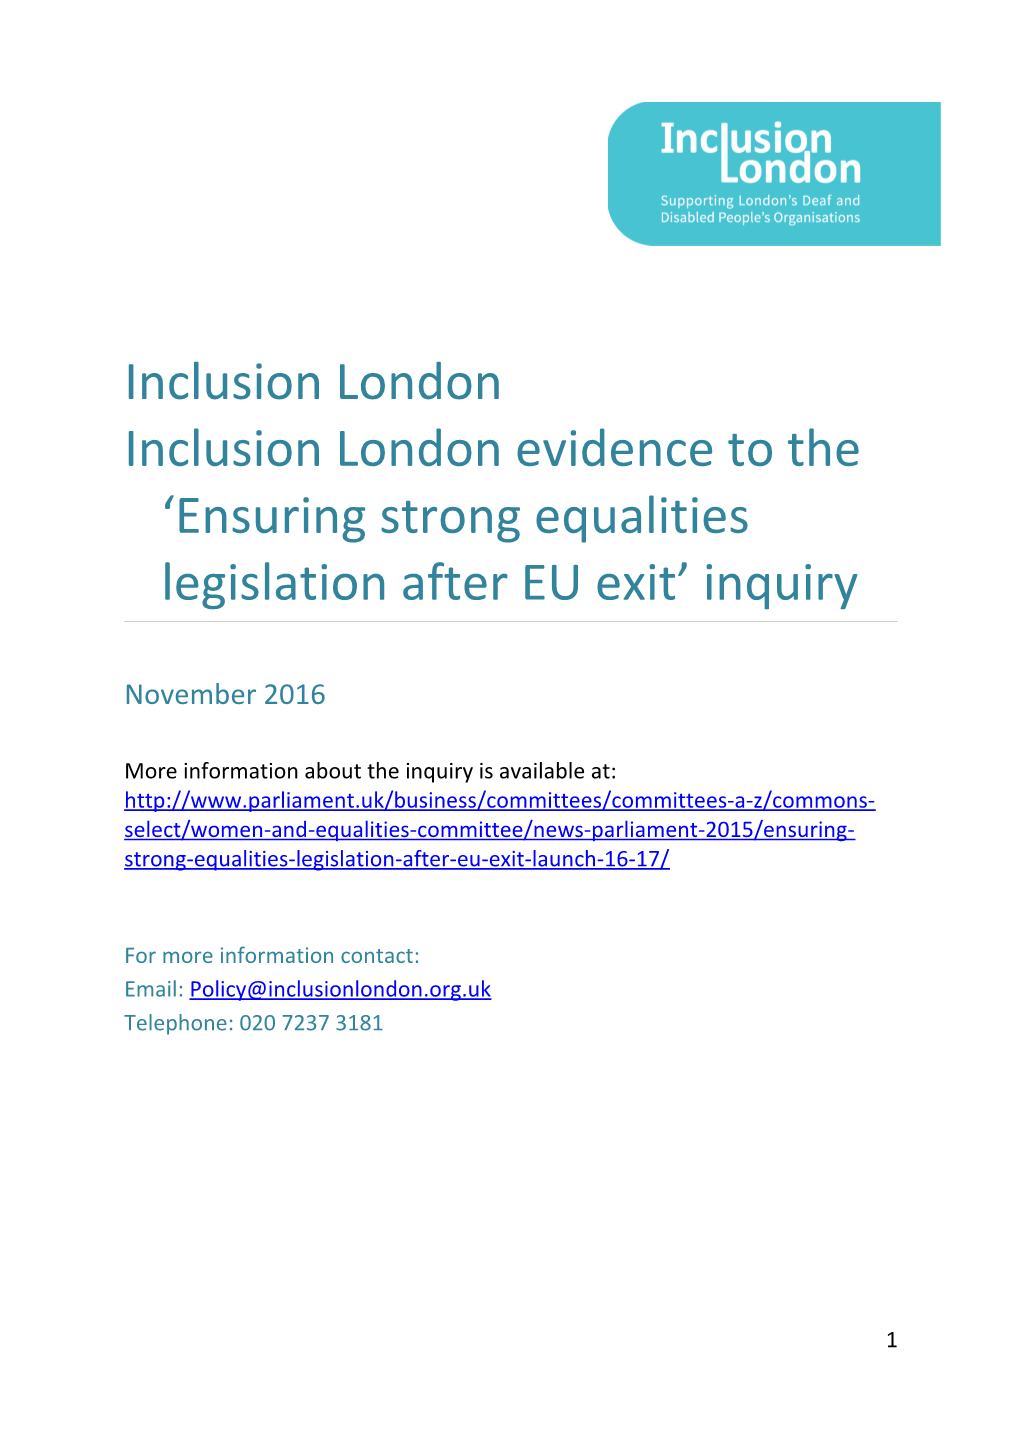 Inclusion London Evidence to the Ensuring Strong Equalities Legislation After EU Exit Inquiry